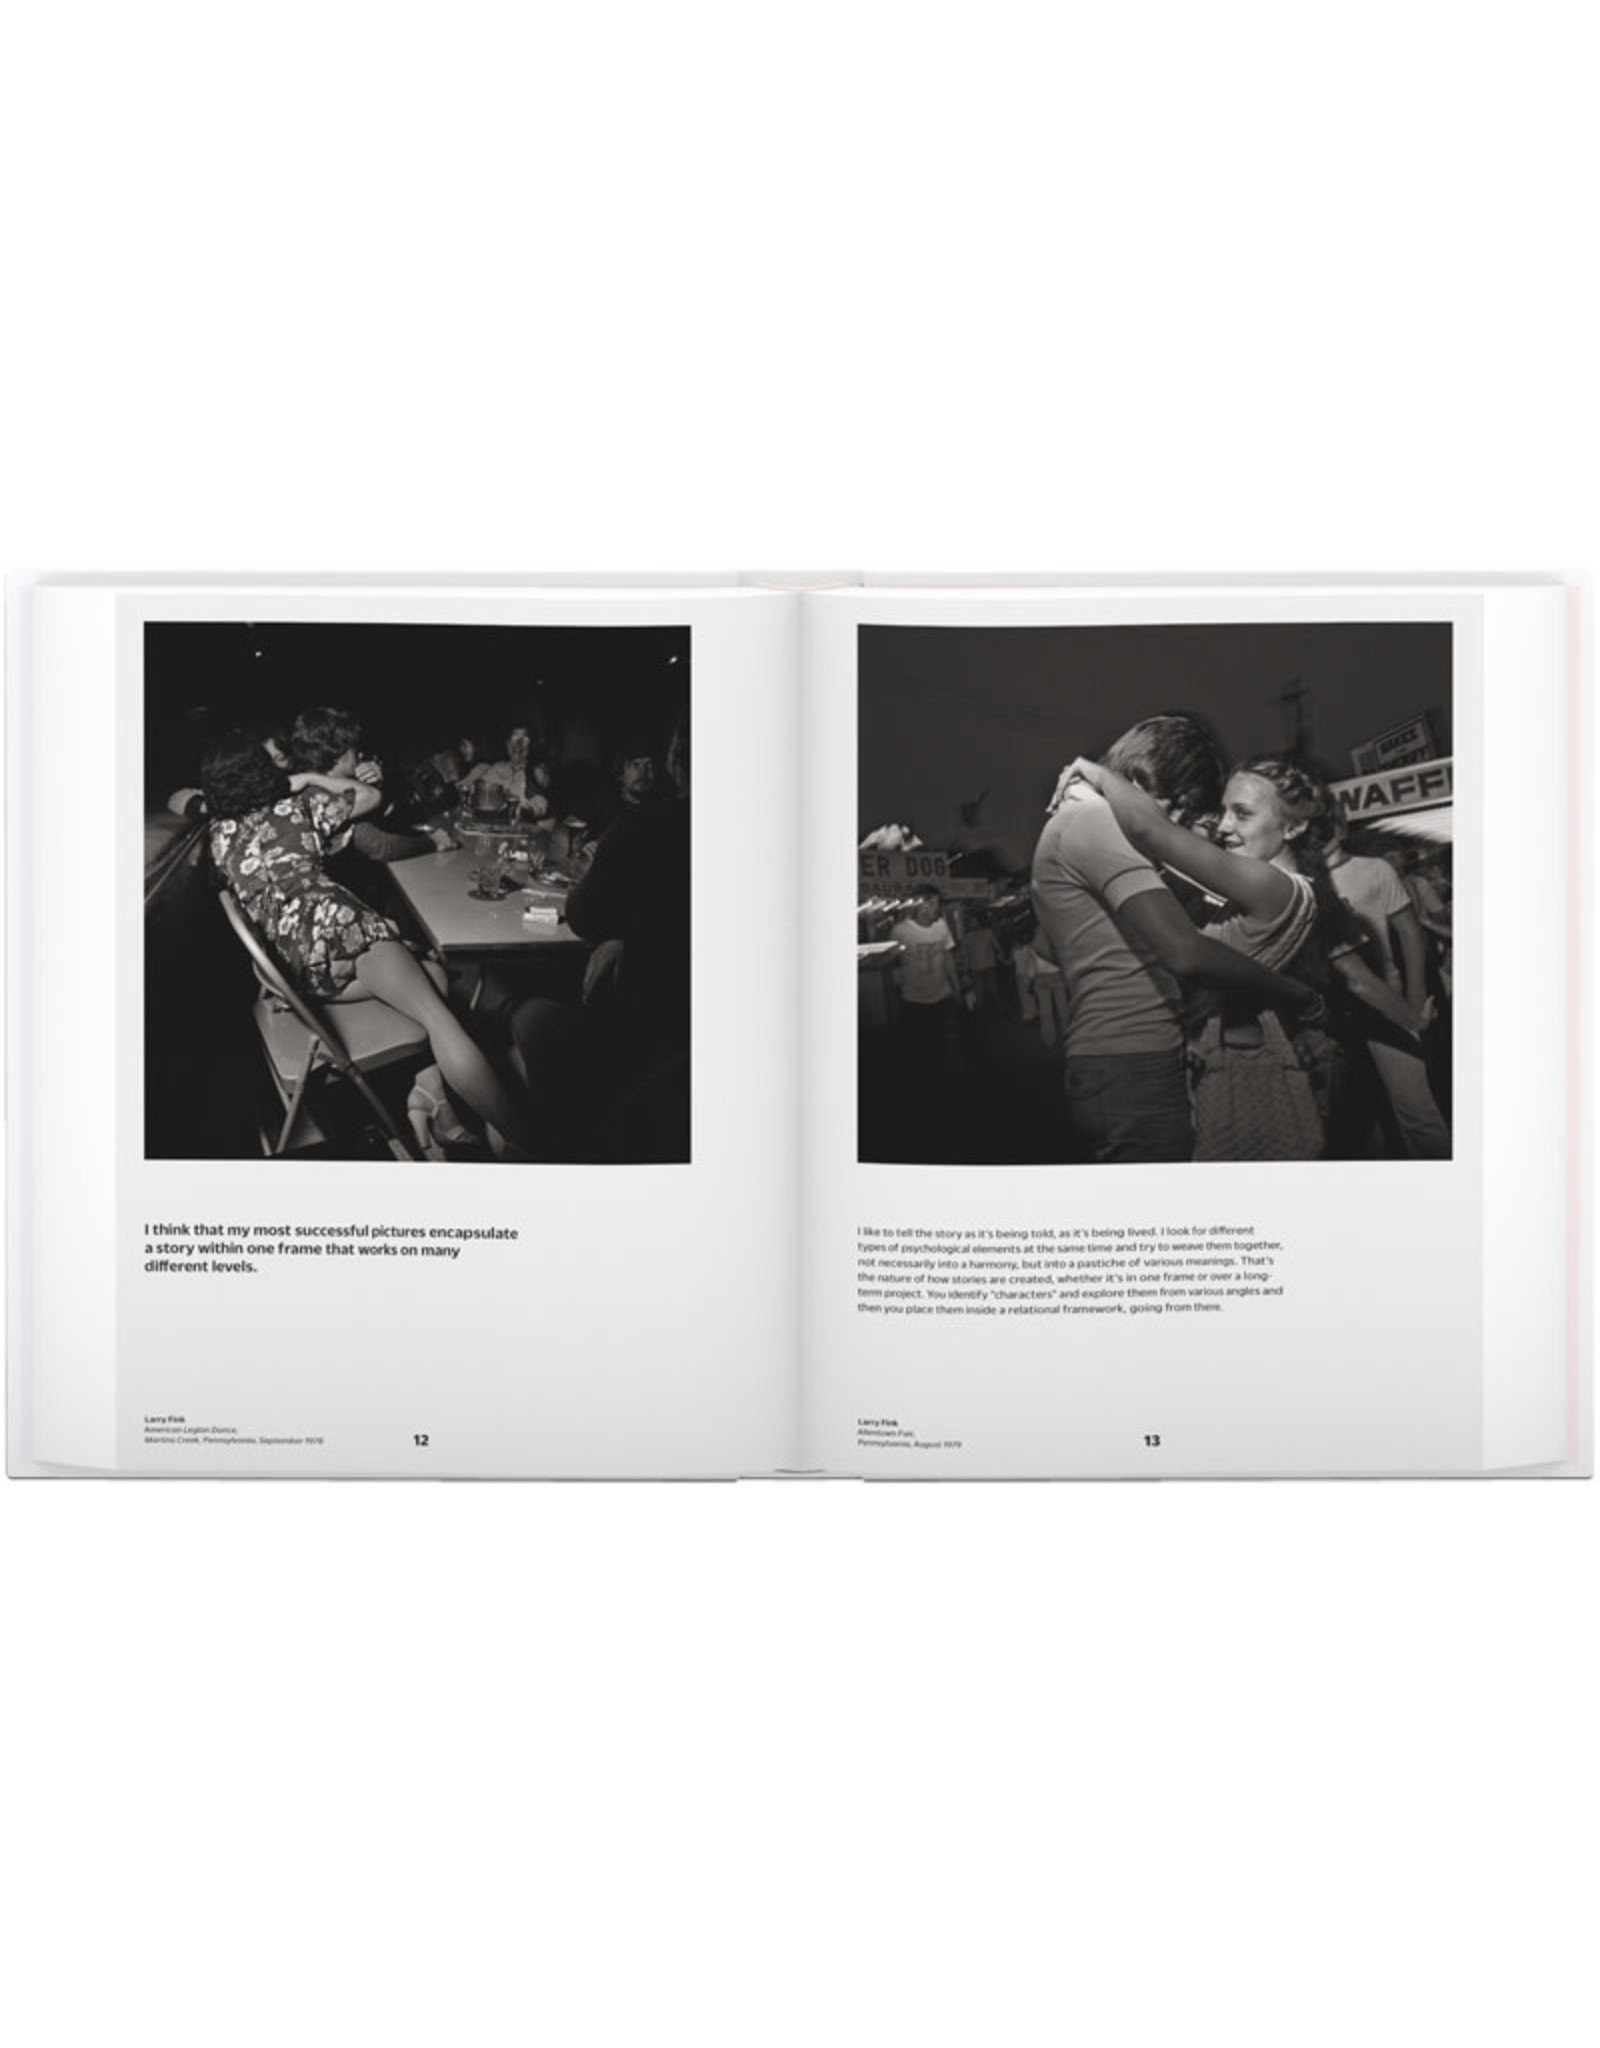 Larry Fink On Composition and Improvisation (The Photography Workshop Series)